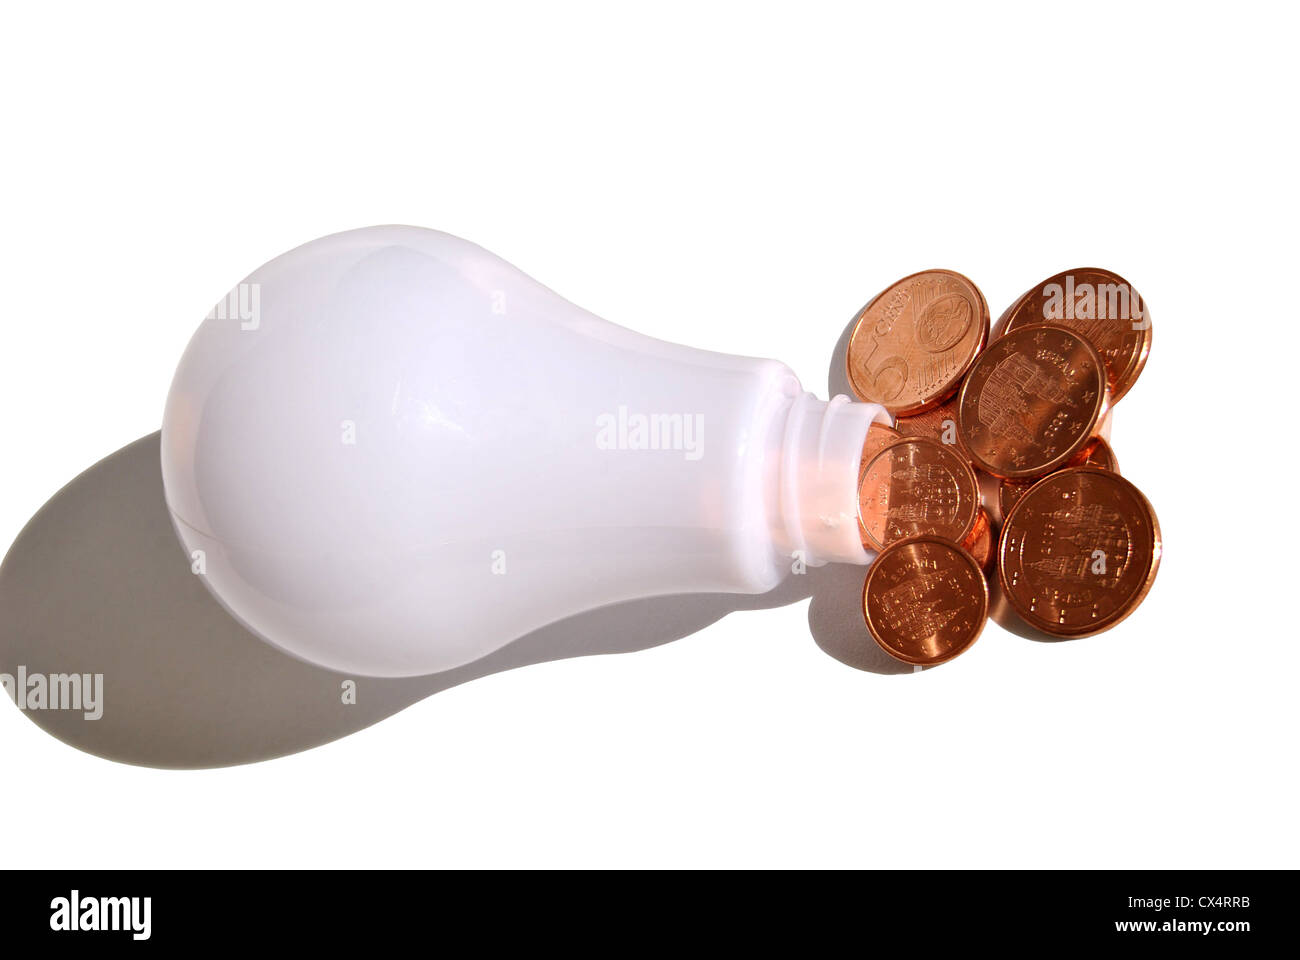 Electricity and money Stock Photo